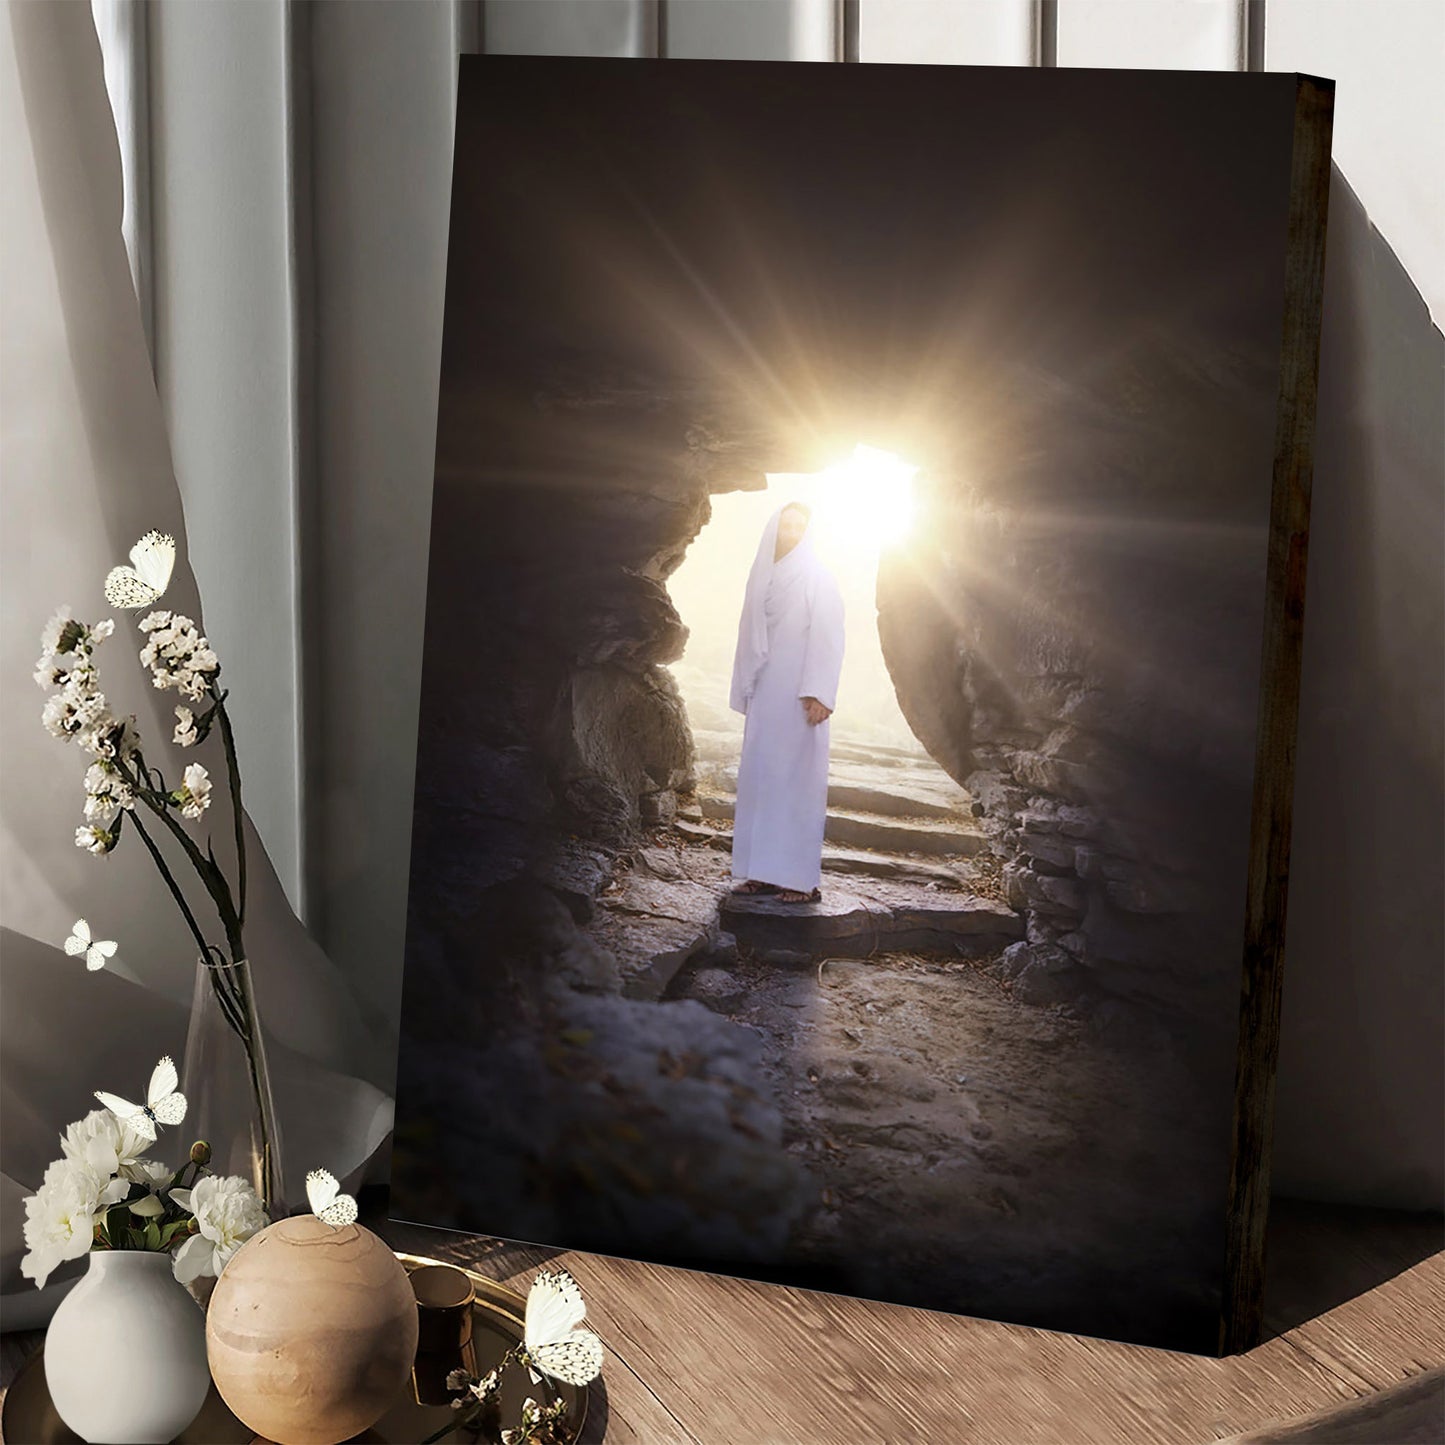 Victorious Canvas Wall Art - Jesus Canvas Pictures - Christian Canvas Wall Art